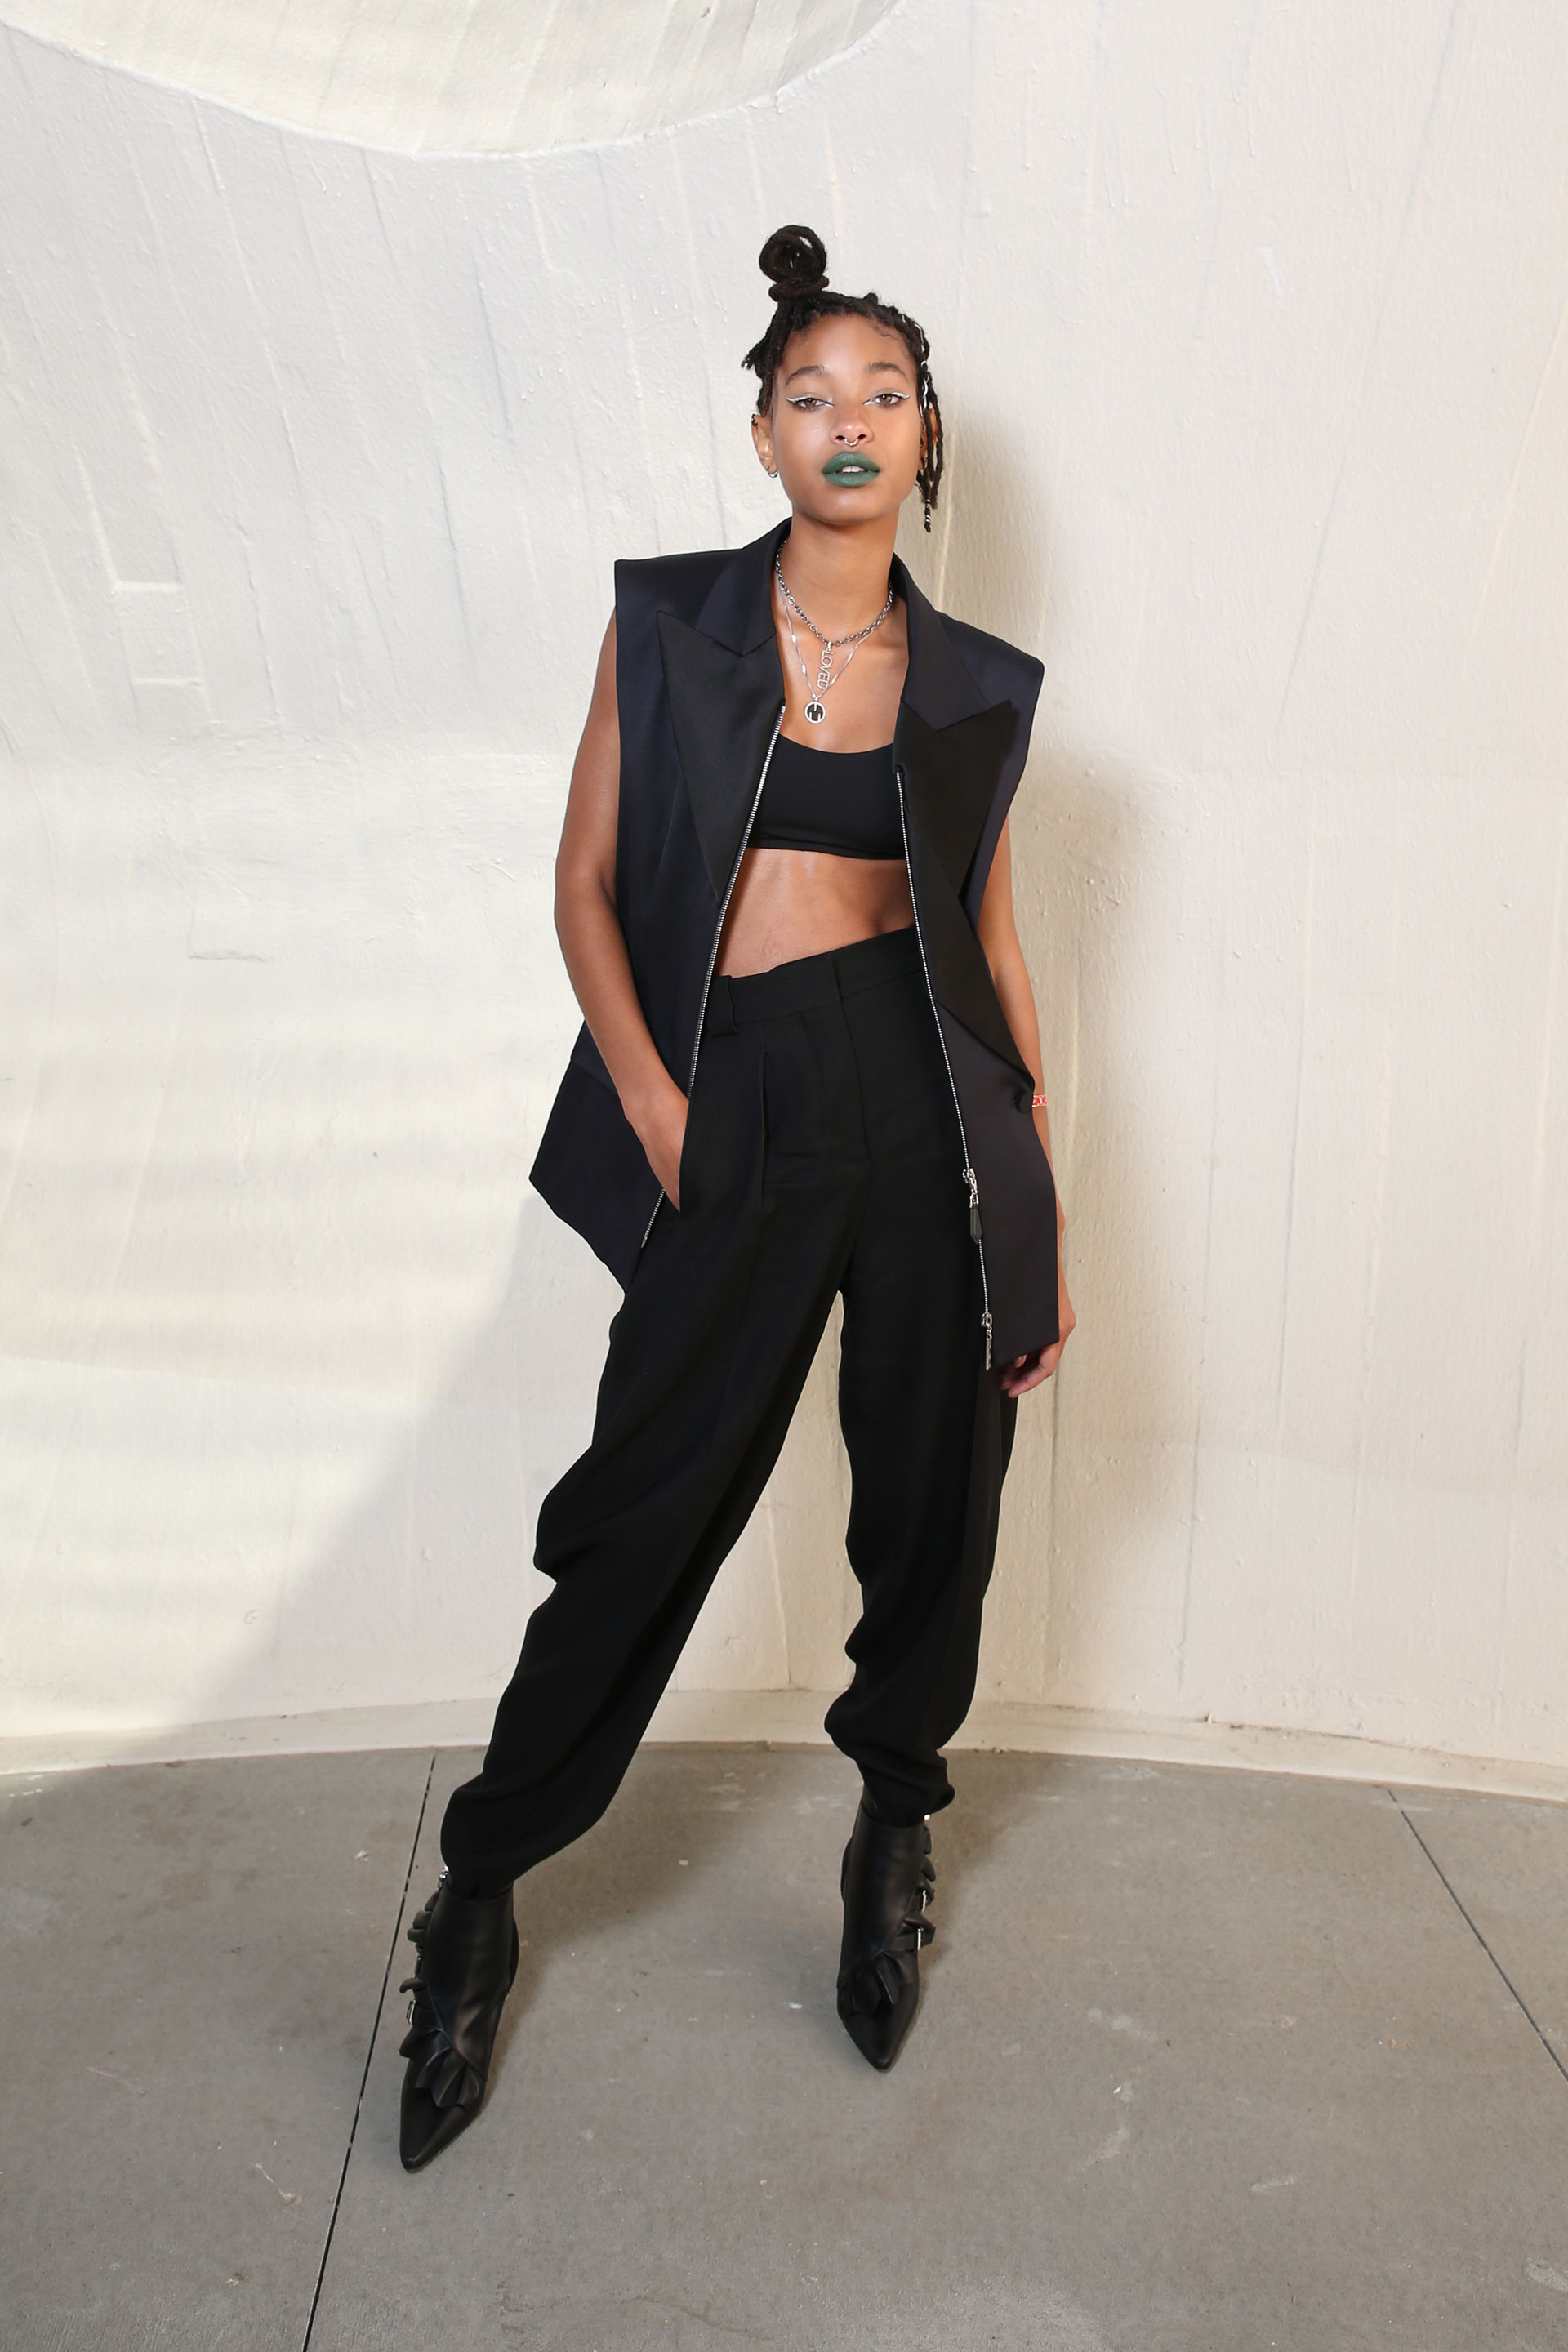 Willow Smith, girl in black.